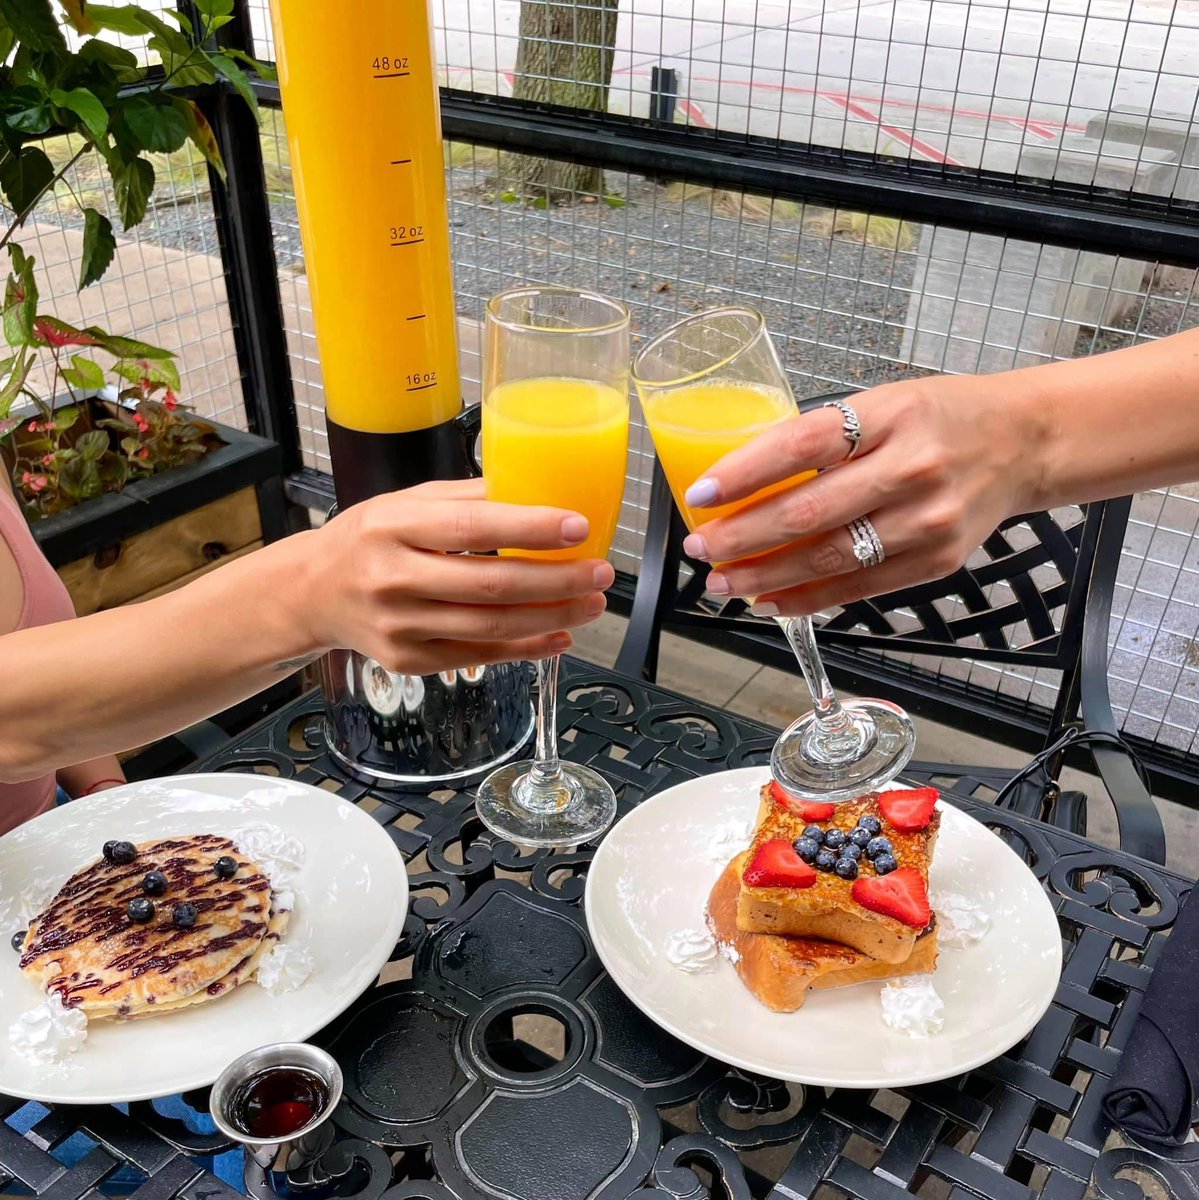 Long Island Café opens with mimosa towers, breakfast happy hours